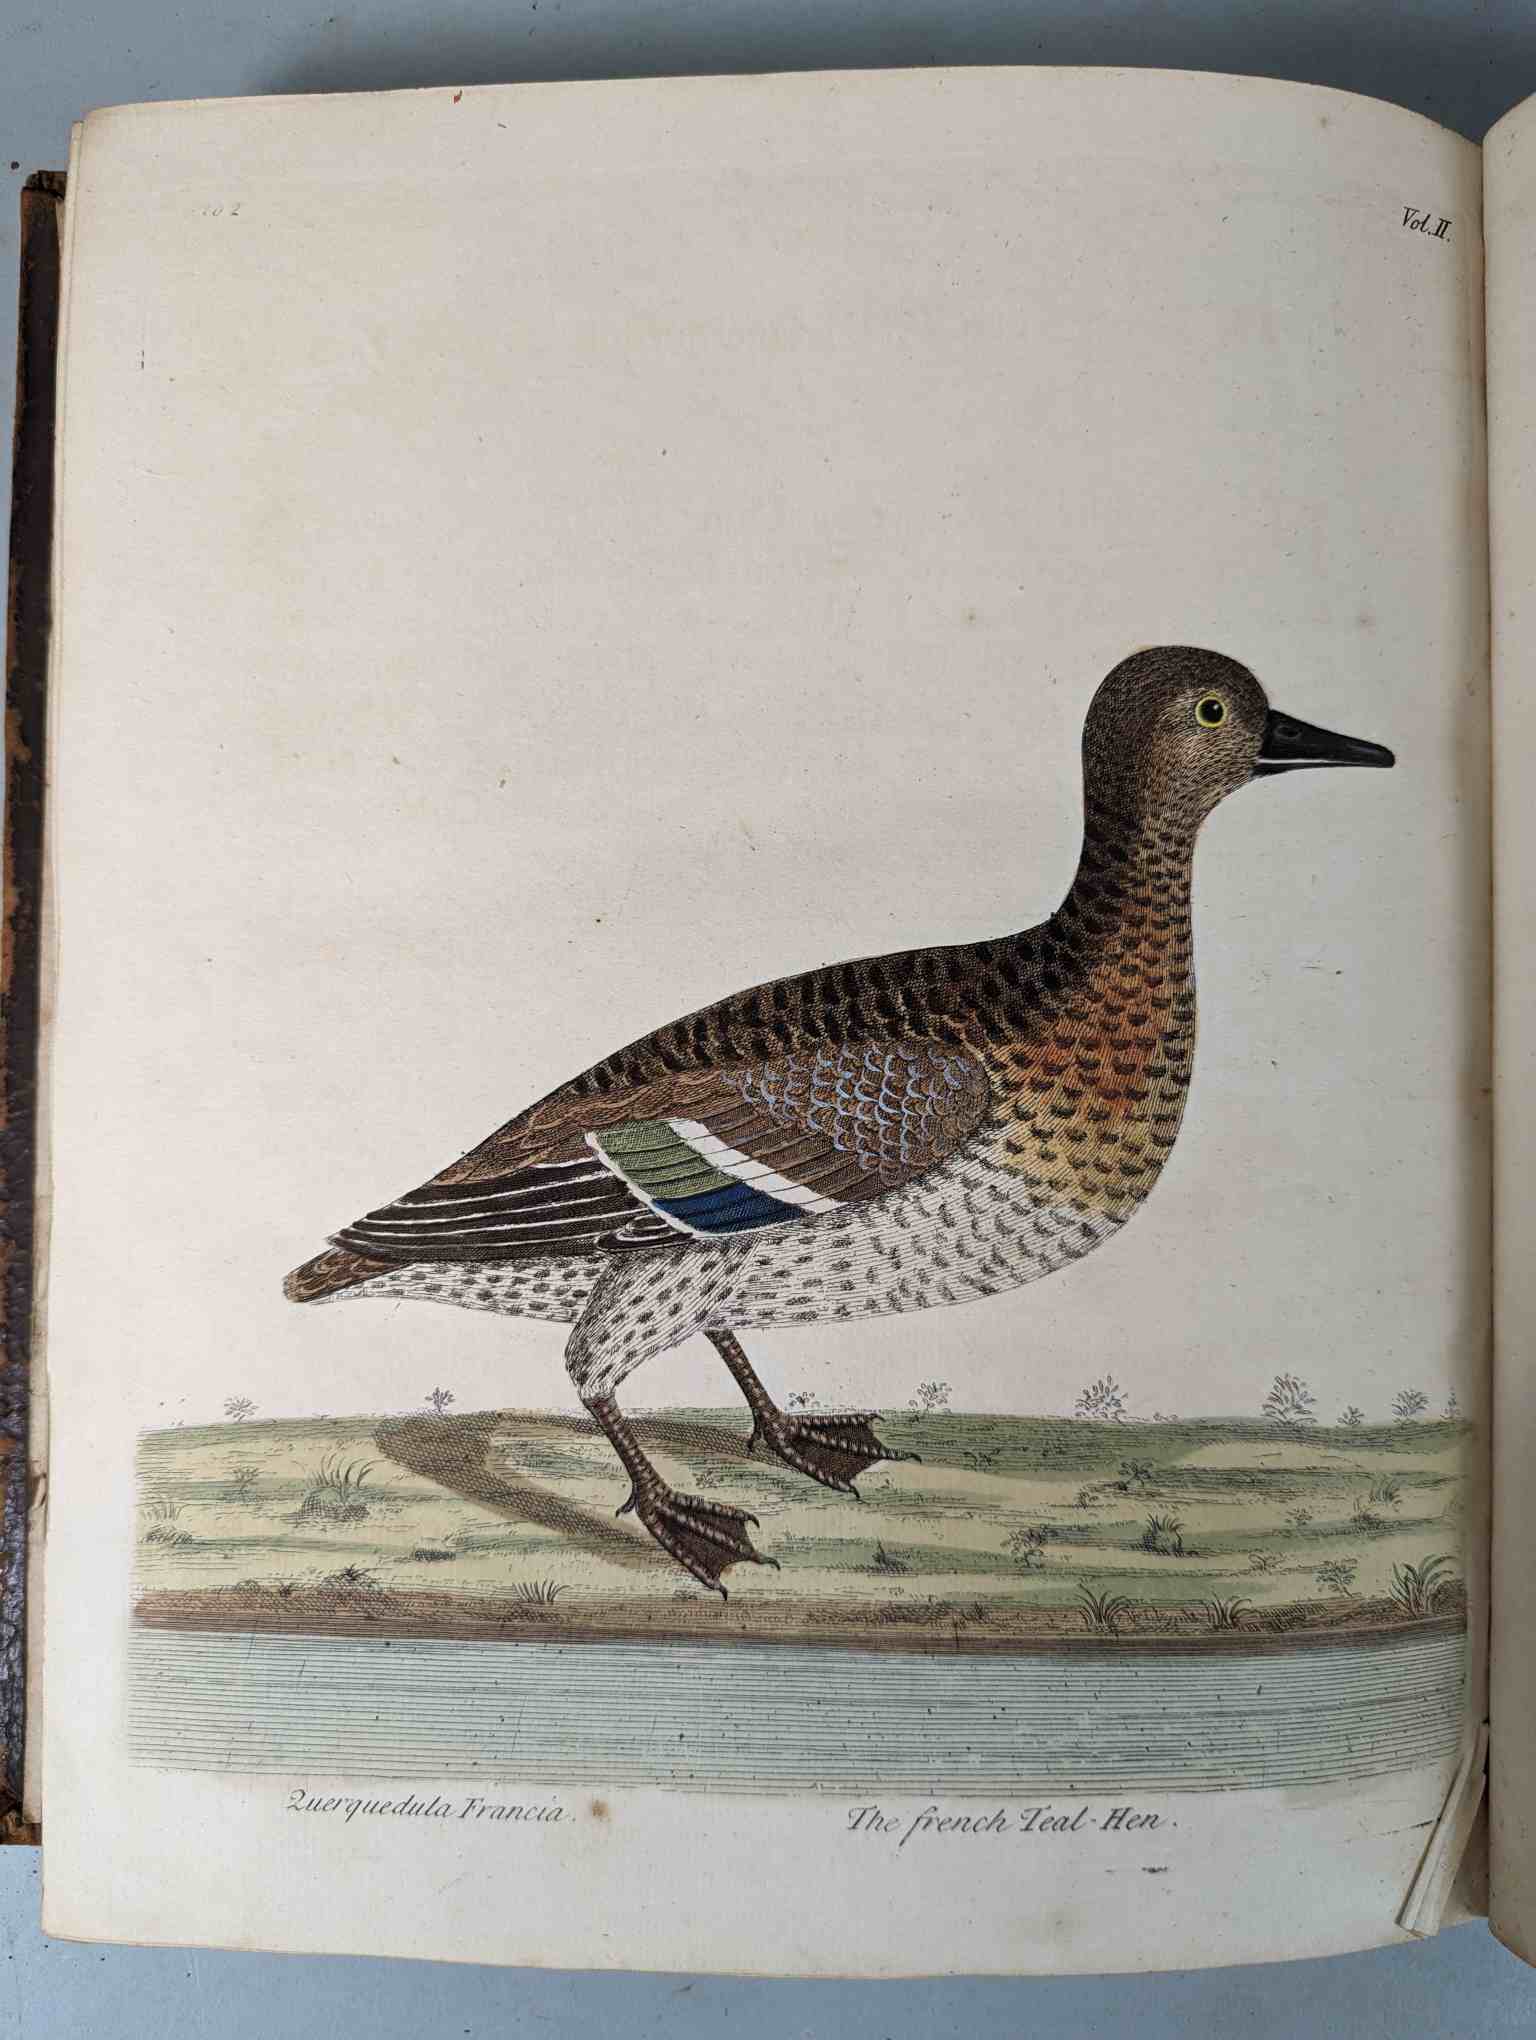 ALBIN, Eleazar. A Natural History of Birds, to which are added, Notes and Observations by W. - Image 206 of 208